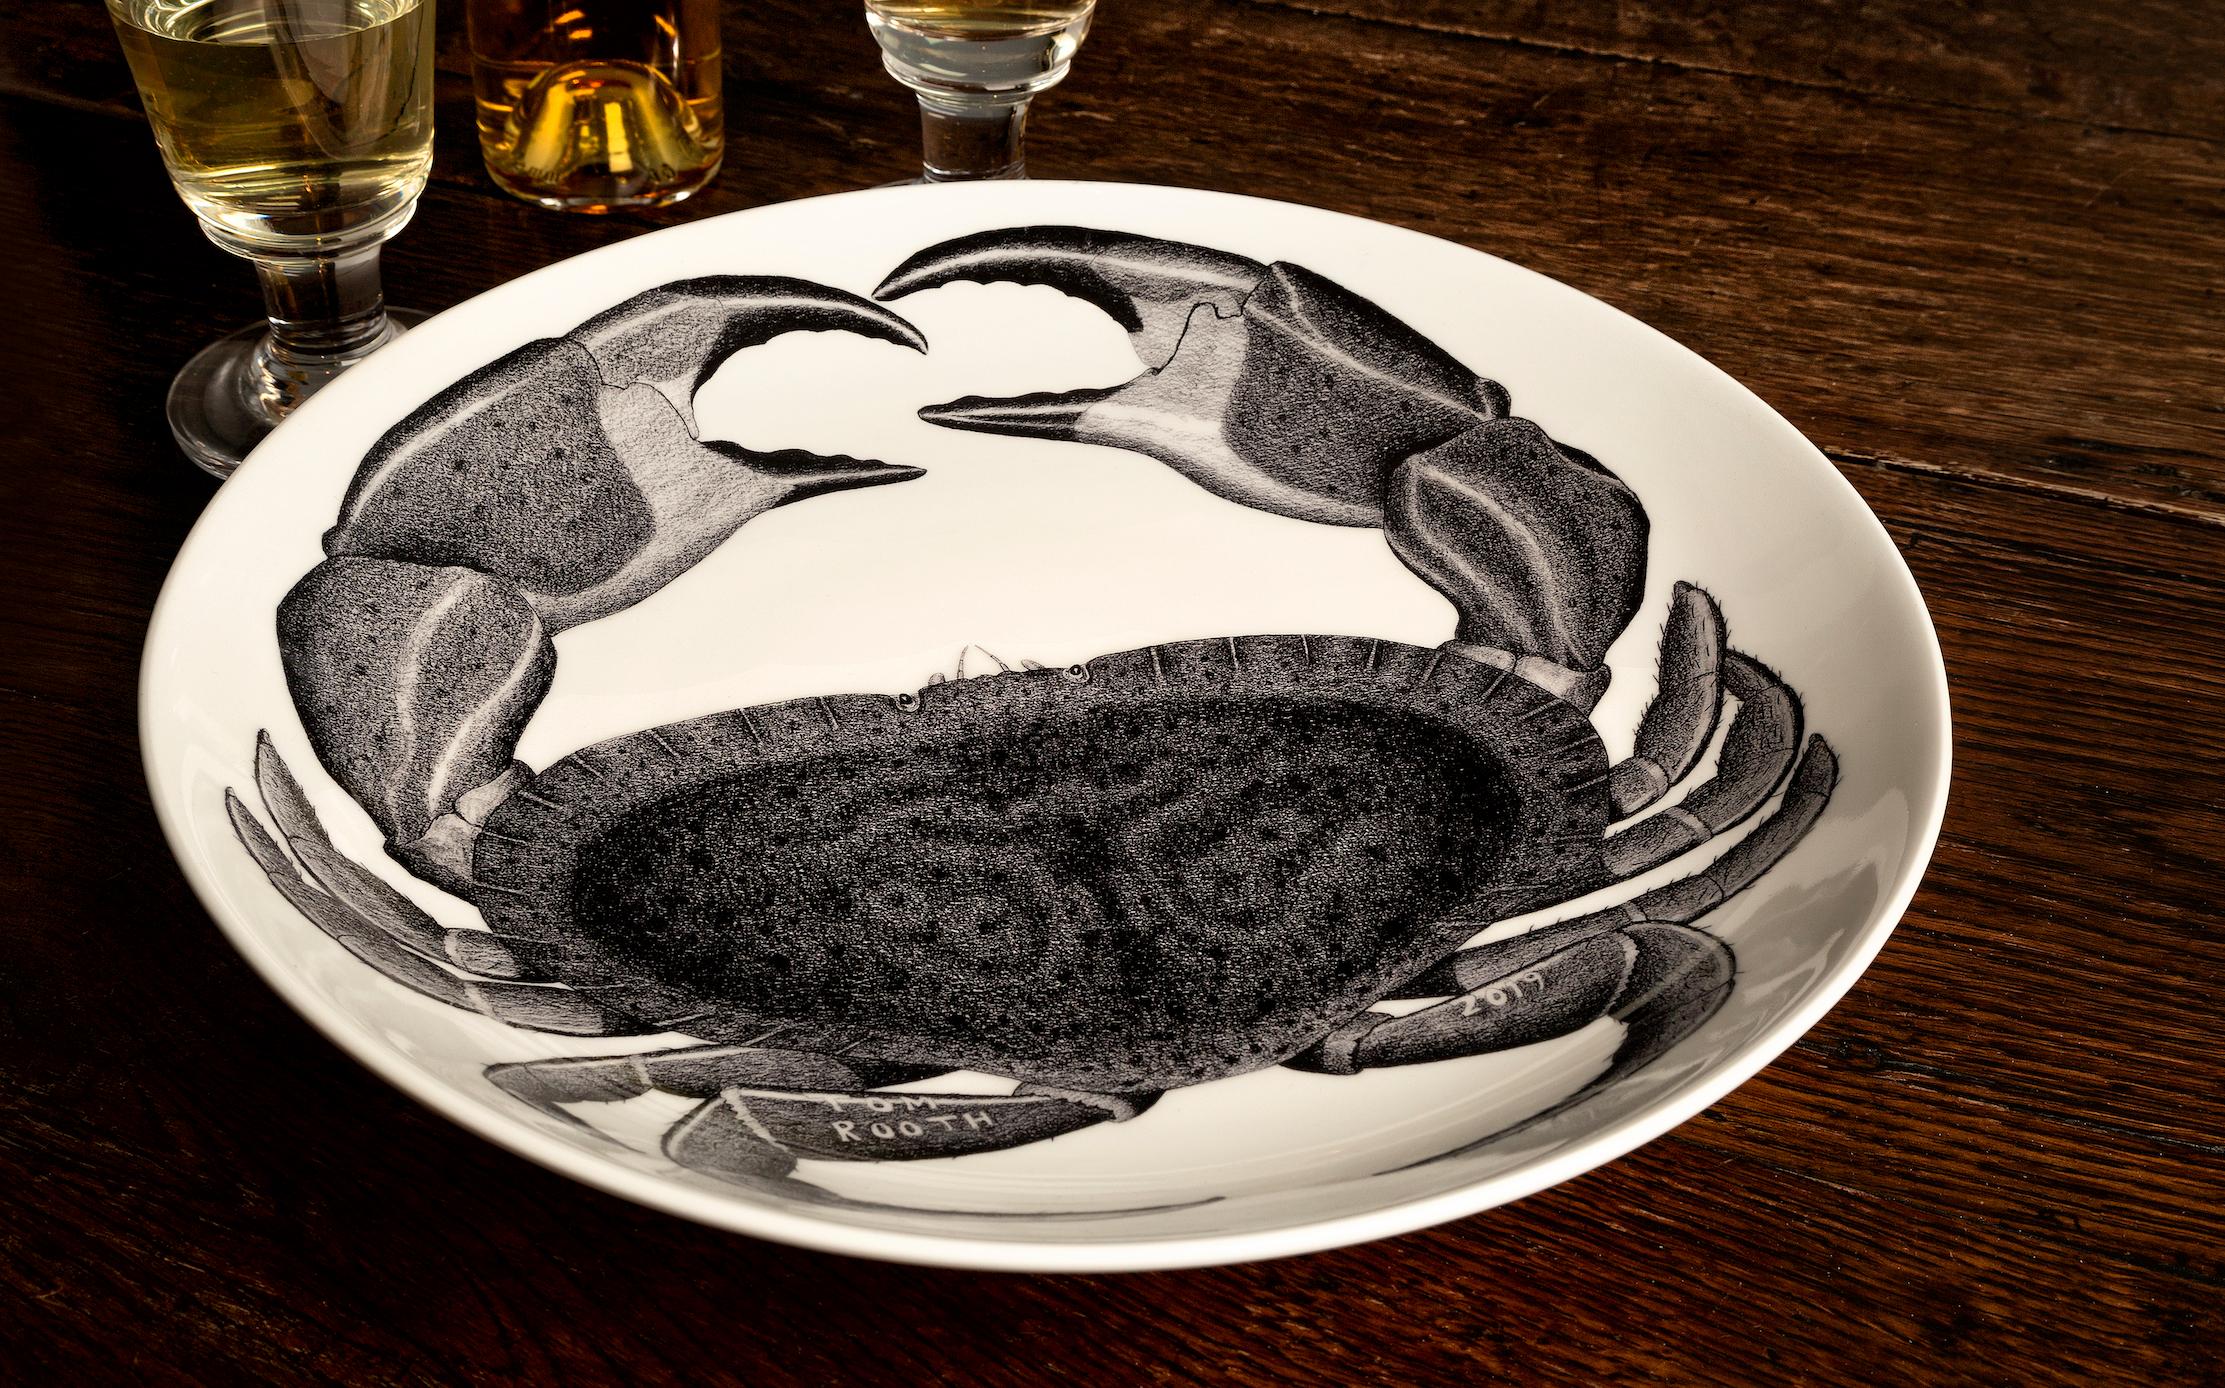 Contemporary Hercules the Crab 'a Life-Sized Crab, Drawn and Released by Tom Rooth' For Sale